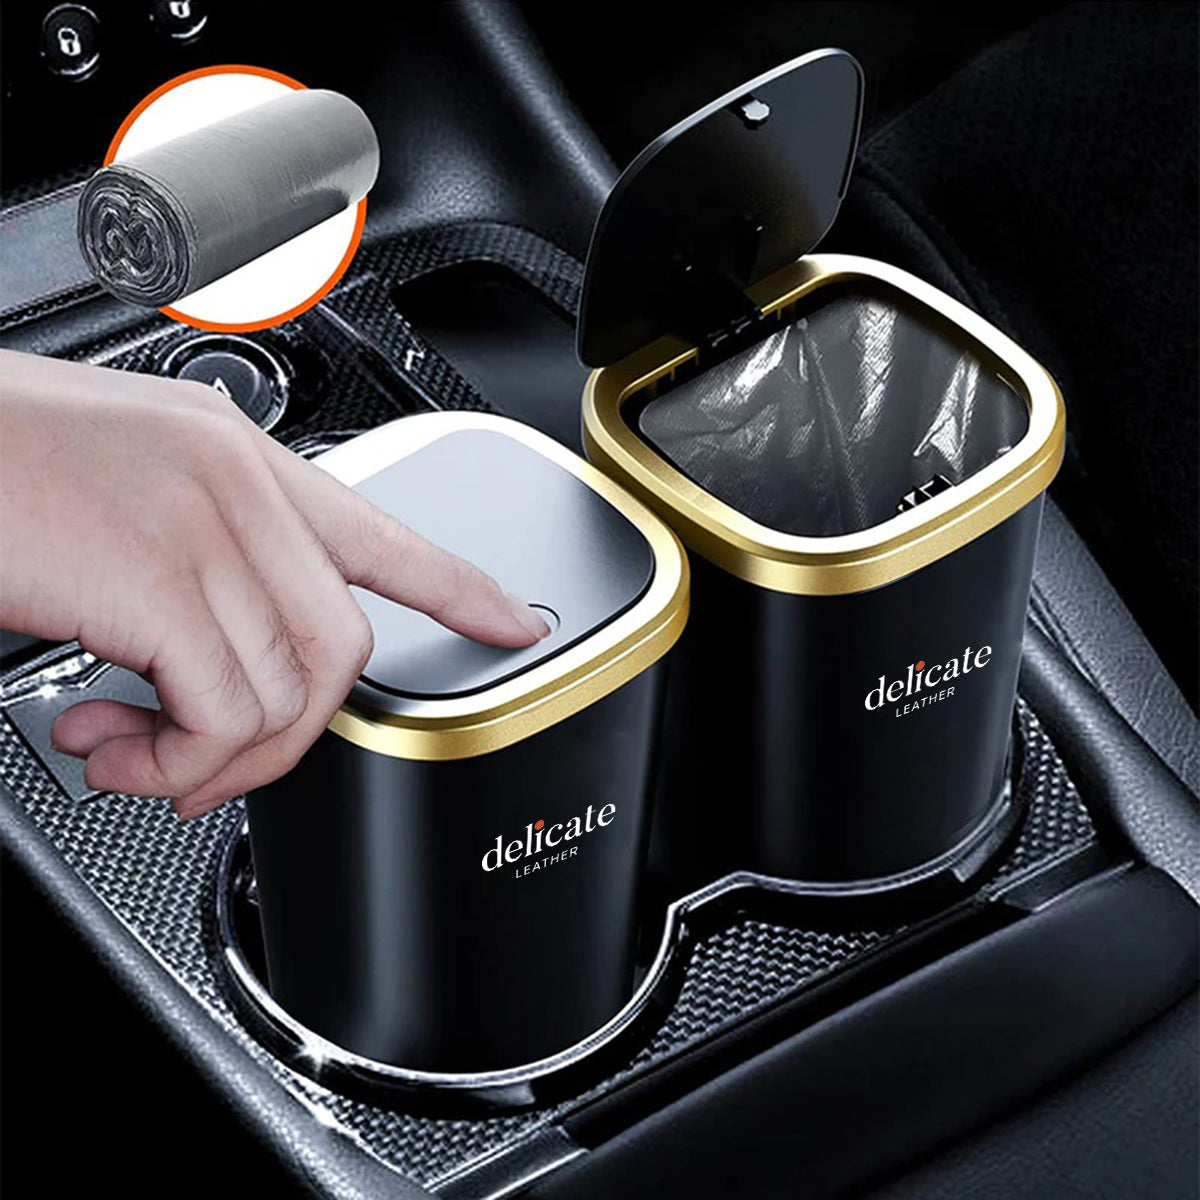 Car Trash Cans, Custom For Your Cars, Compact & Durable Car Accessories for Interior Use 2 Pack, Practical Car Organizers and Storage Cups with Pop-Up Open, Car Accessories MA11993 - Delicate Leather